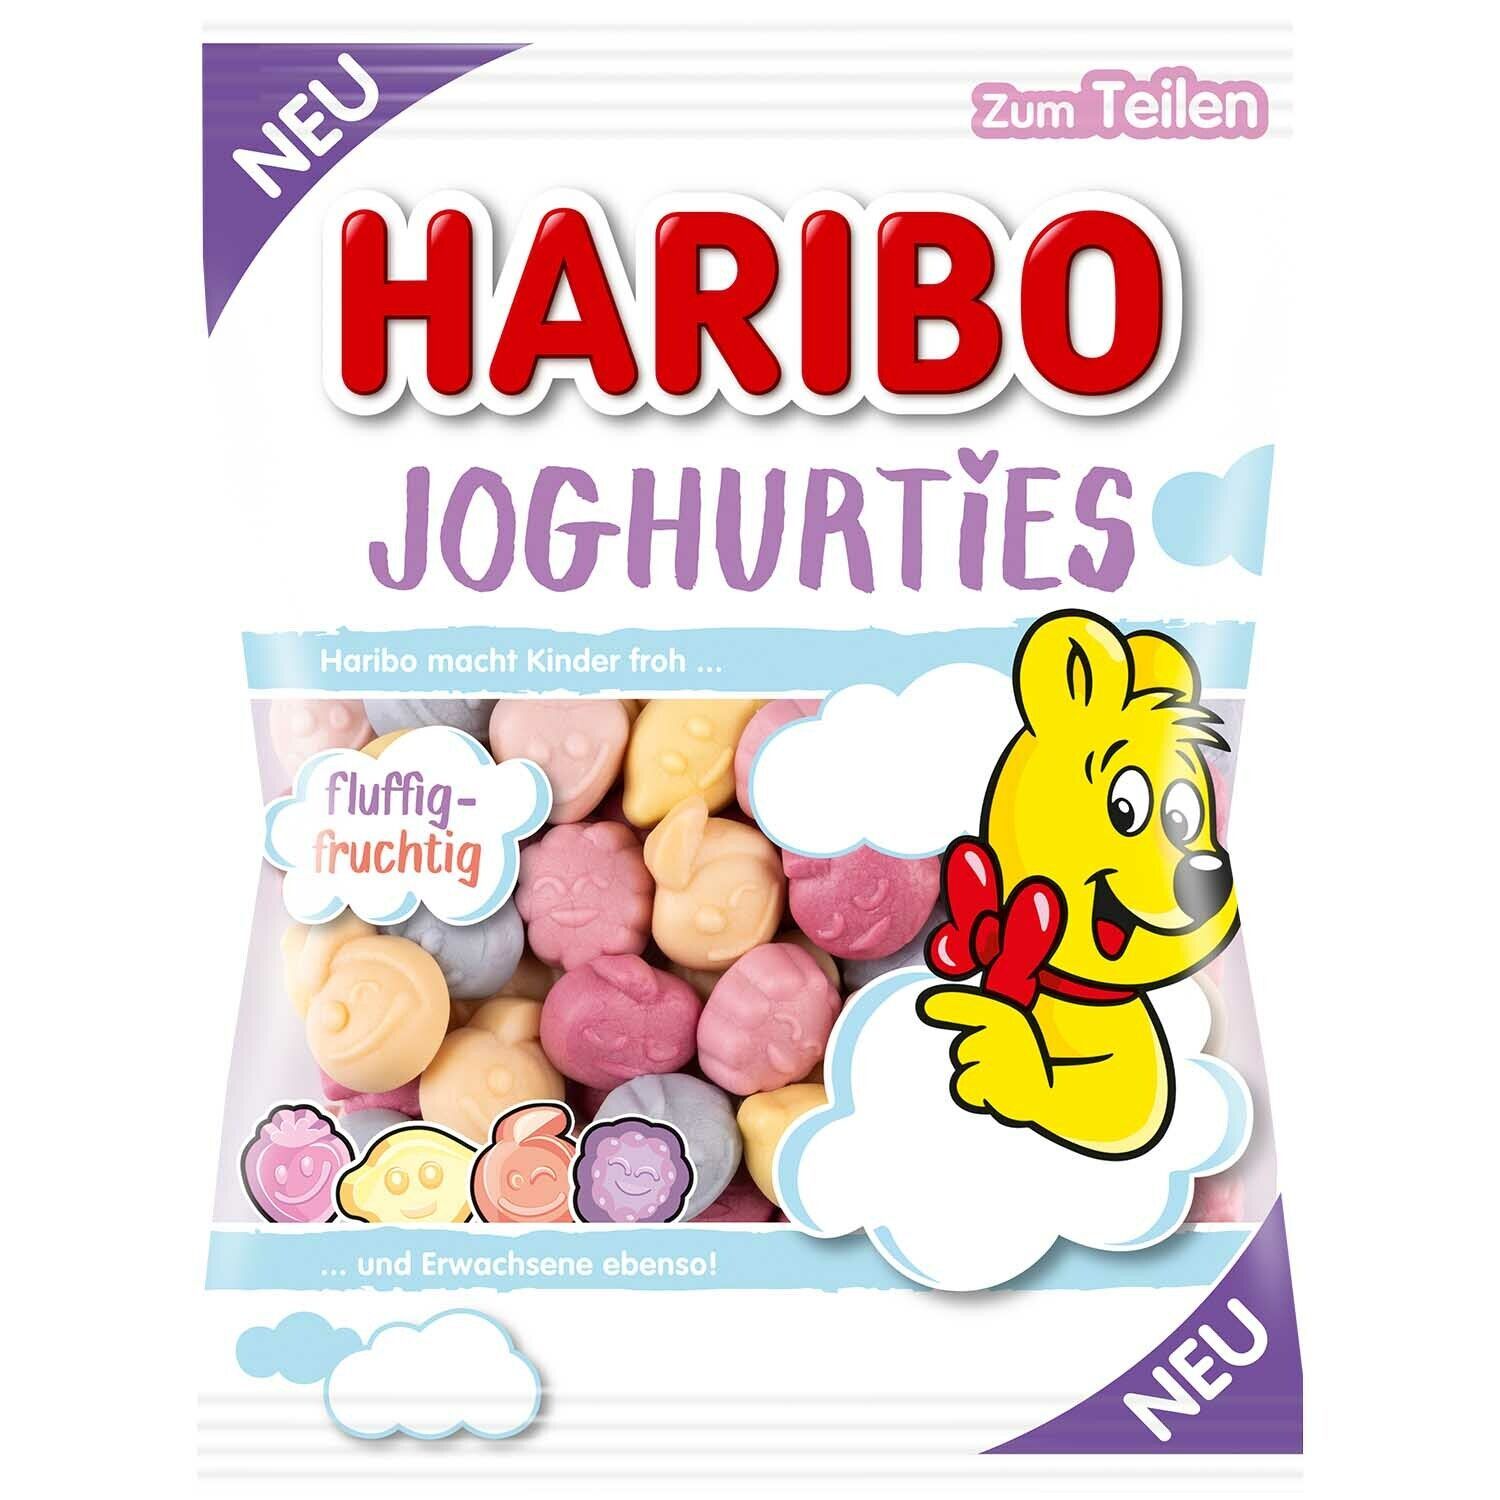 HARIBO Joghurties yoghurt flavored gummy bears from Germany 160g -FREE SHIPPING - $8.37